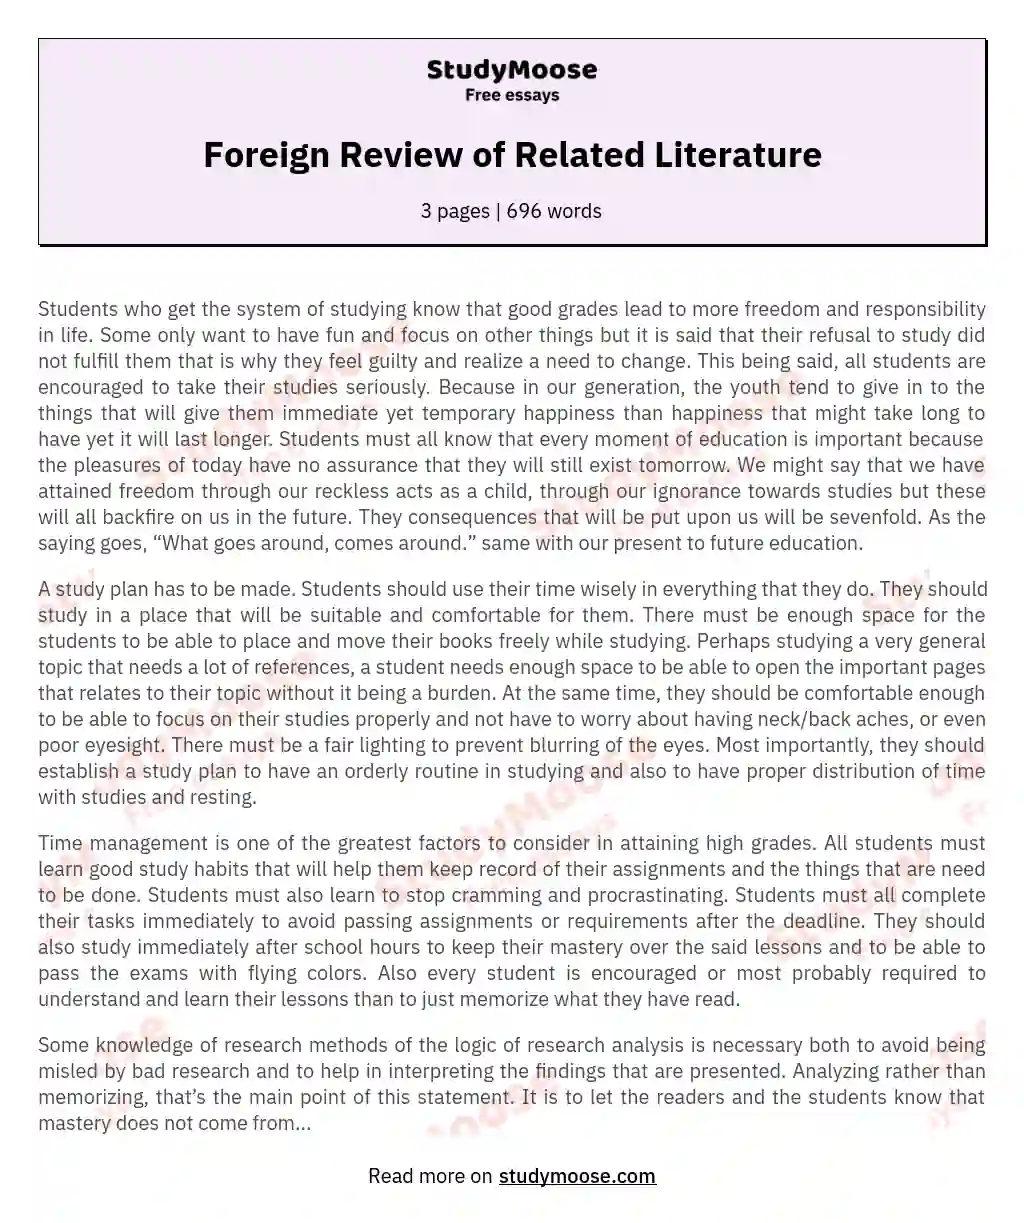 Foreign Review of Related Literature essay